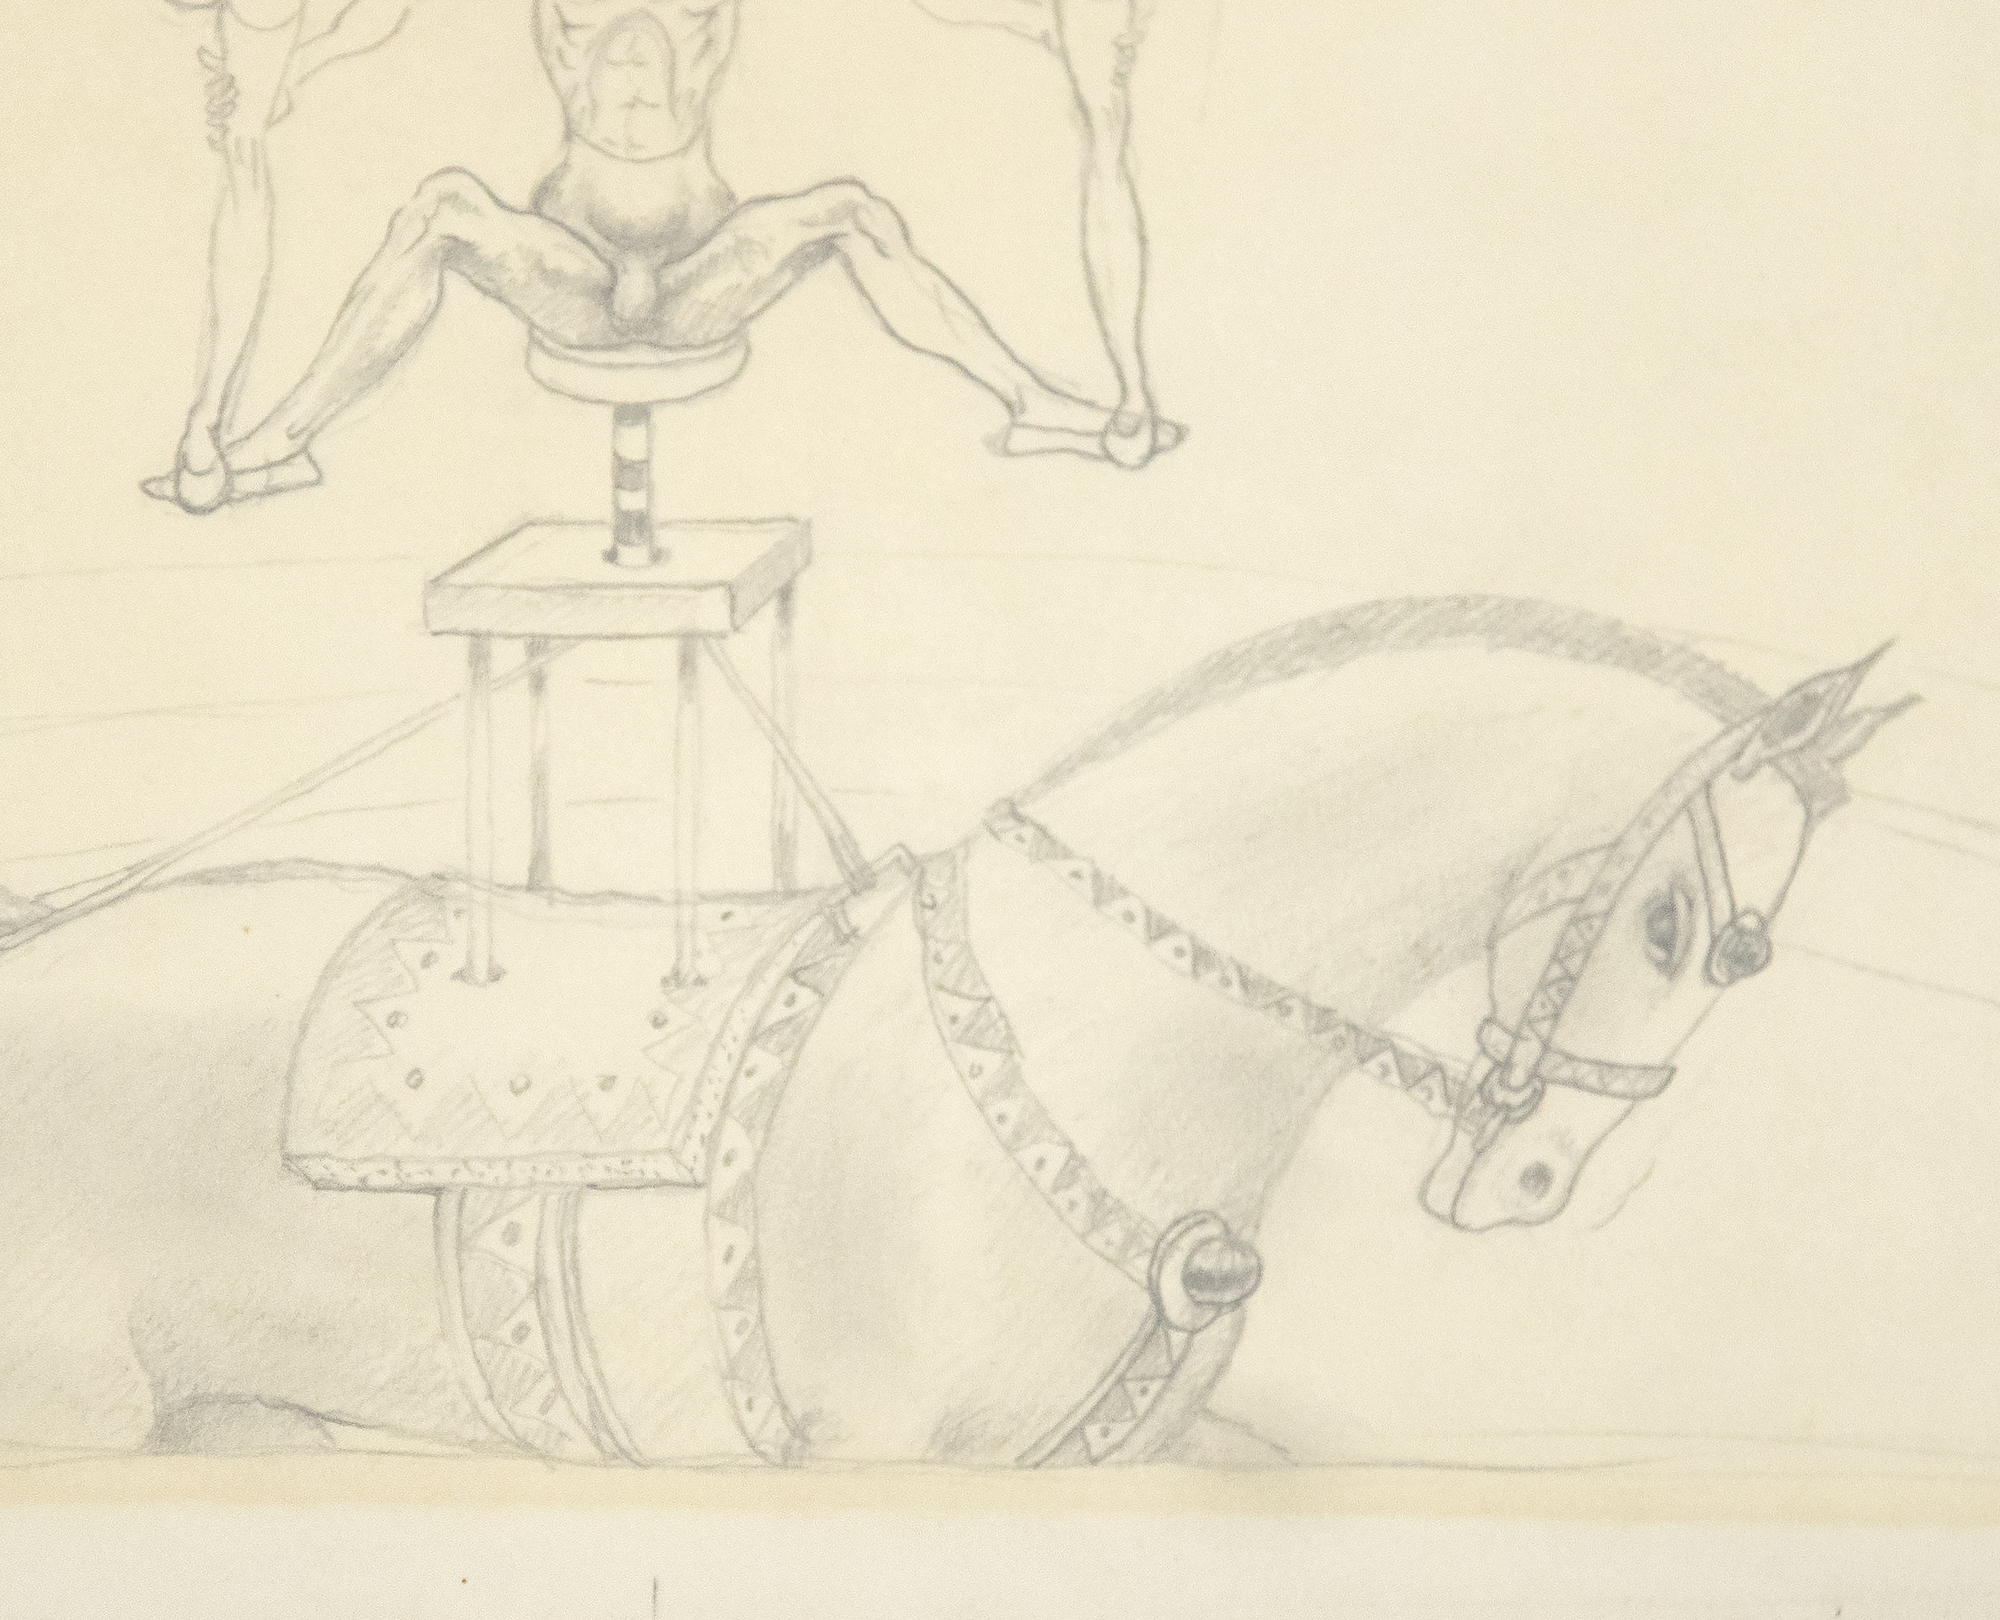 IRVING NORMAN - The Circus, The Balancing Act 2a (a Study) - pencil on paper - 11 x 9 in.